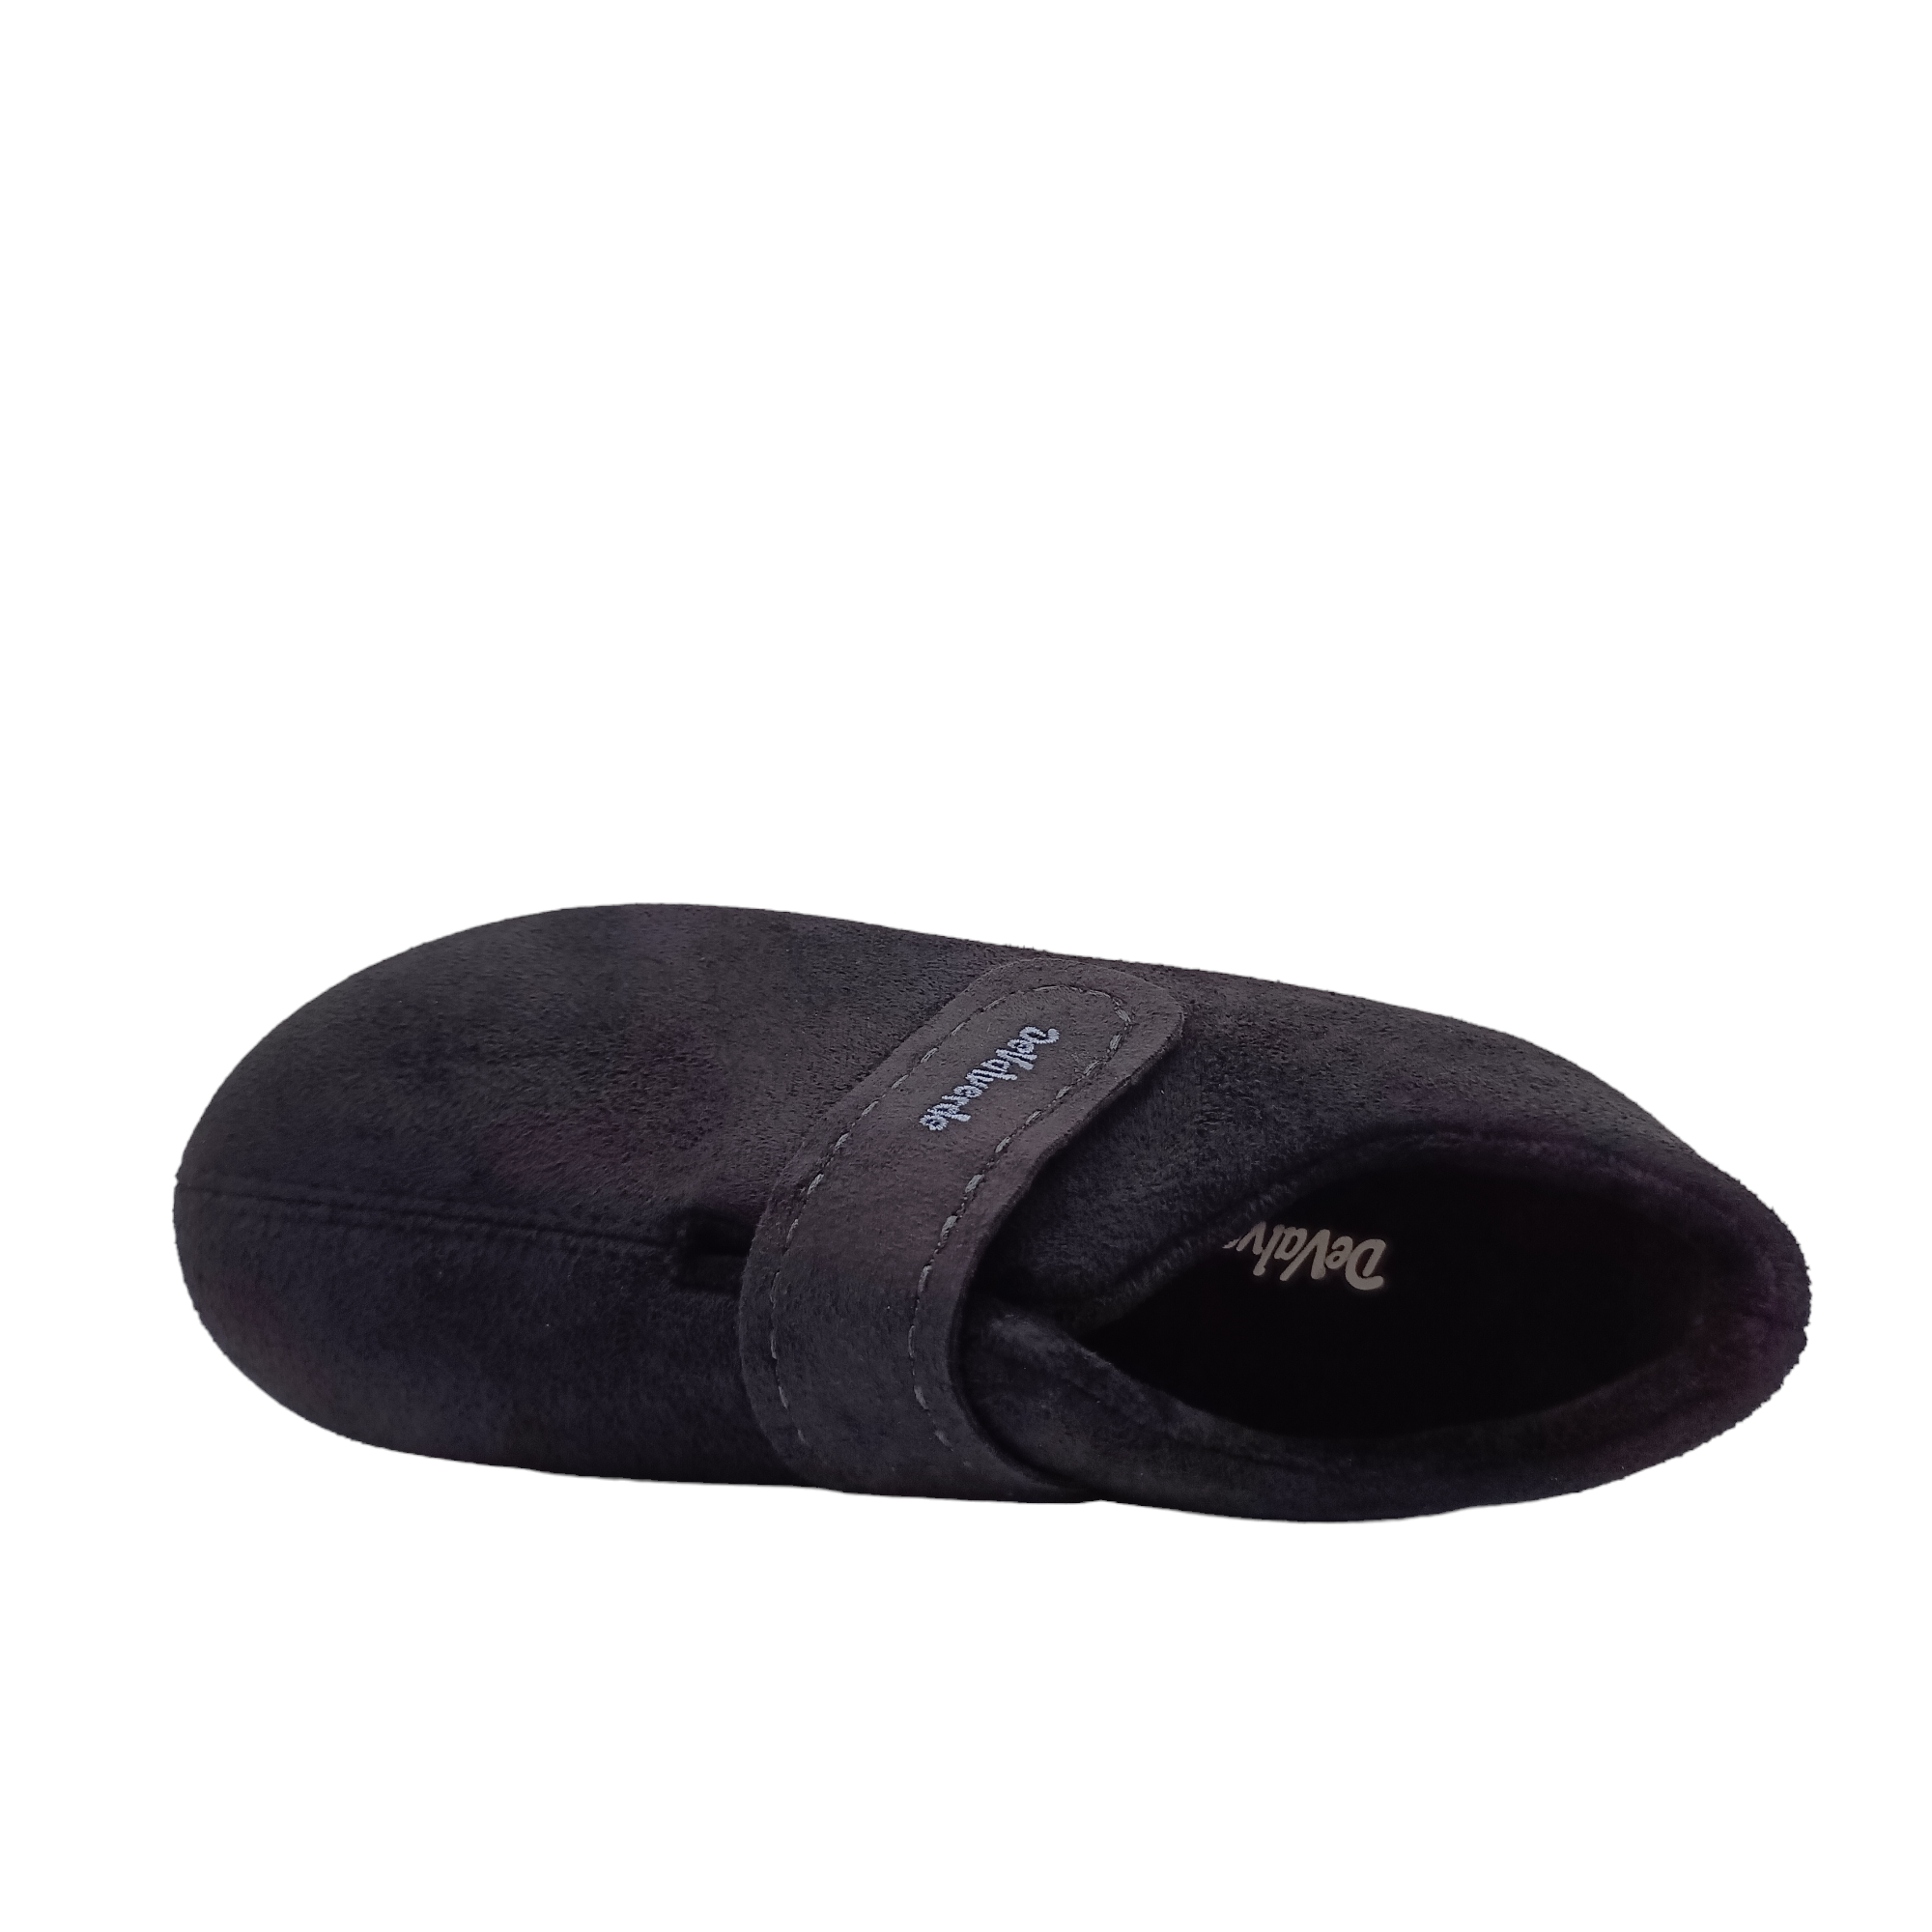 Shop Snuggles DeValverde - with shoe&amp;me - from DeValverde - Slippers - Slipper, Winter, Womens - [collection]